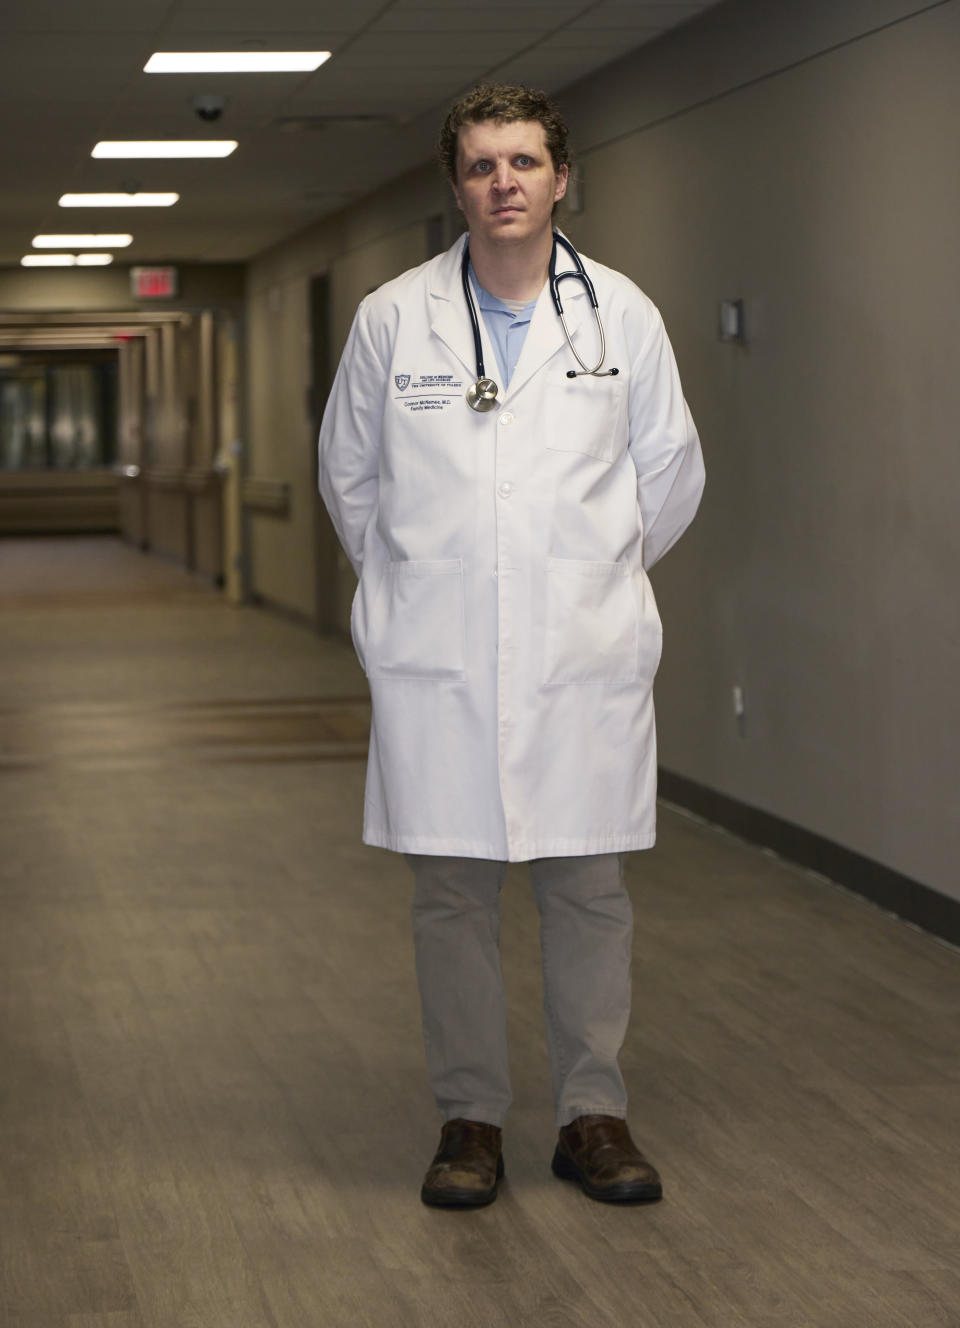 Dr. Connor McNamee, a third-year family medicine resident at the University of Toledo Medical Center, poses at the medical center, Tuesday, Oct. 18, 2022, in Toledo, Ohio. Students in obstetrics-gynecology and family medicine are facing tough choices about where to advance their training in a landscape where legal access to abortion varies from state to state. McNamee began exploring abortion training outside Ohio last summer. A state law bans most abortions after cardiac activity is detected, but a judge has blocked it while a challenge proceeds. (AP Photo/Rick Osentoski)